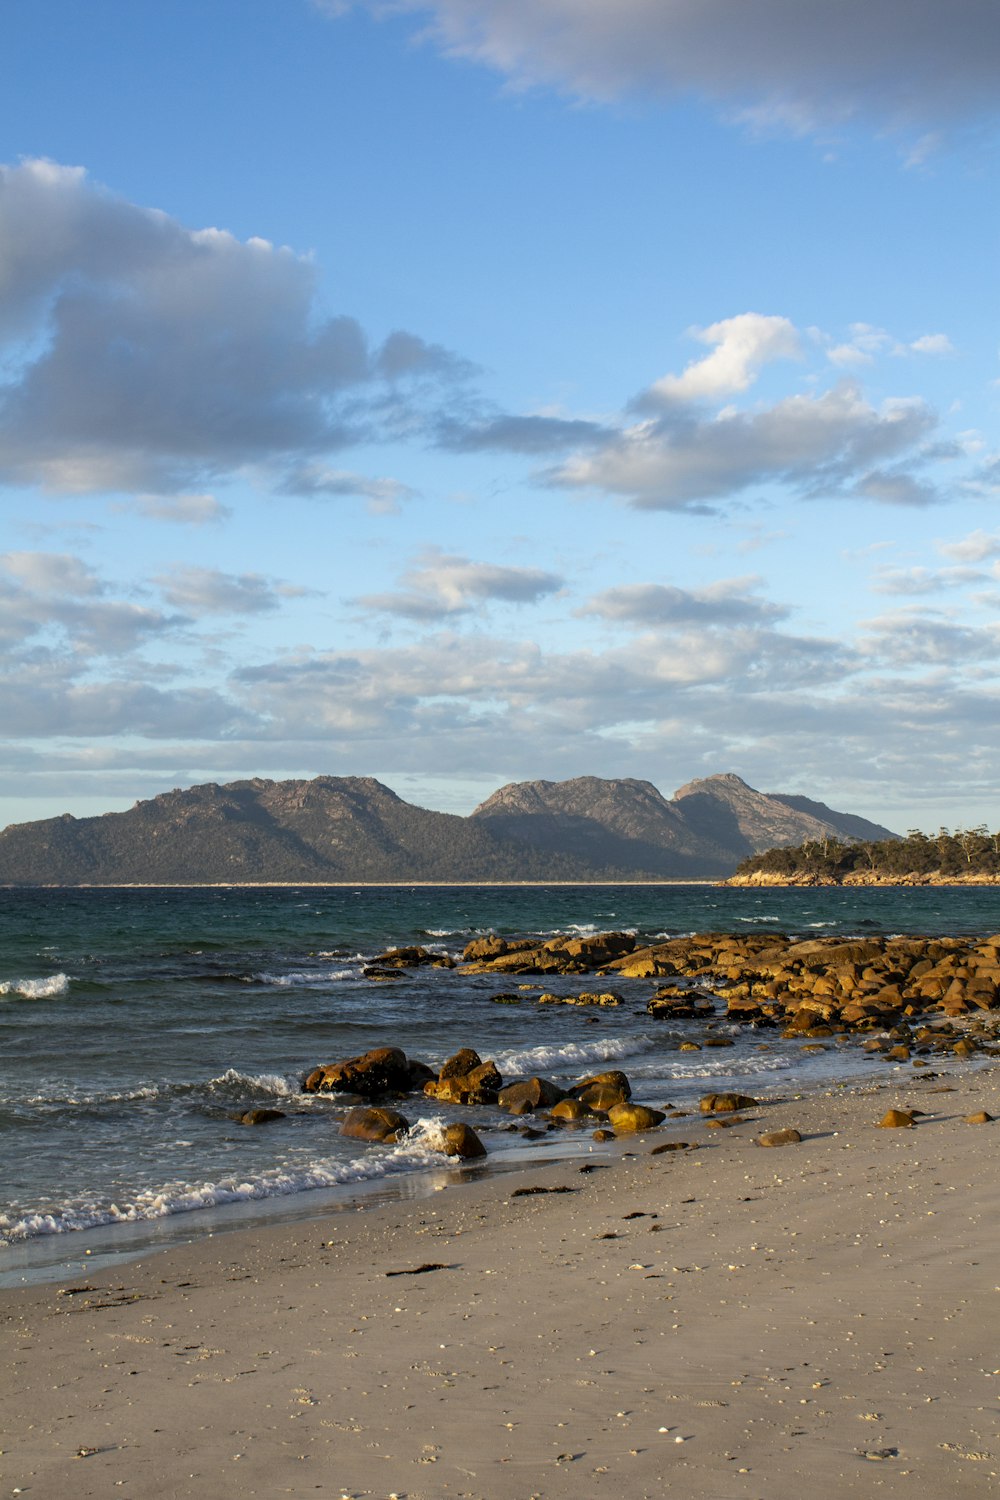 a view of a beach with mountains in the background